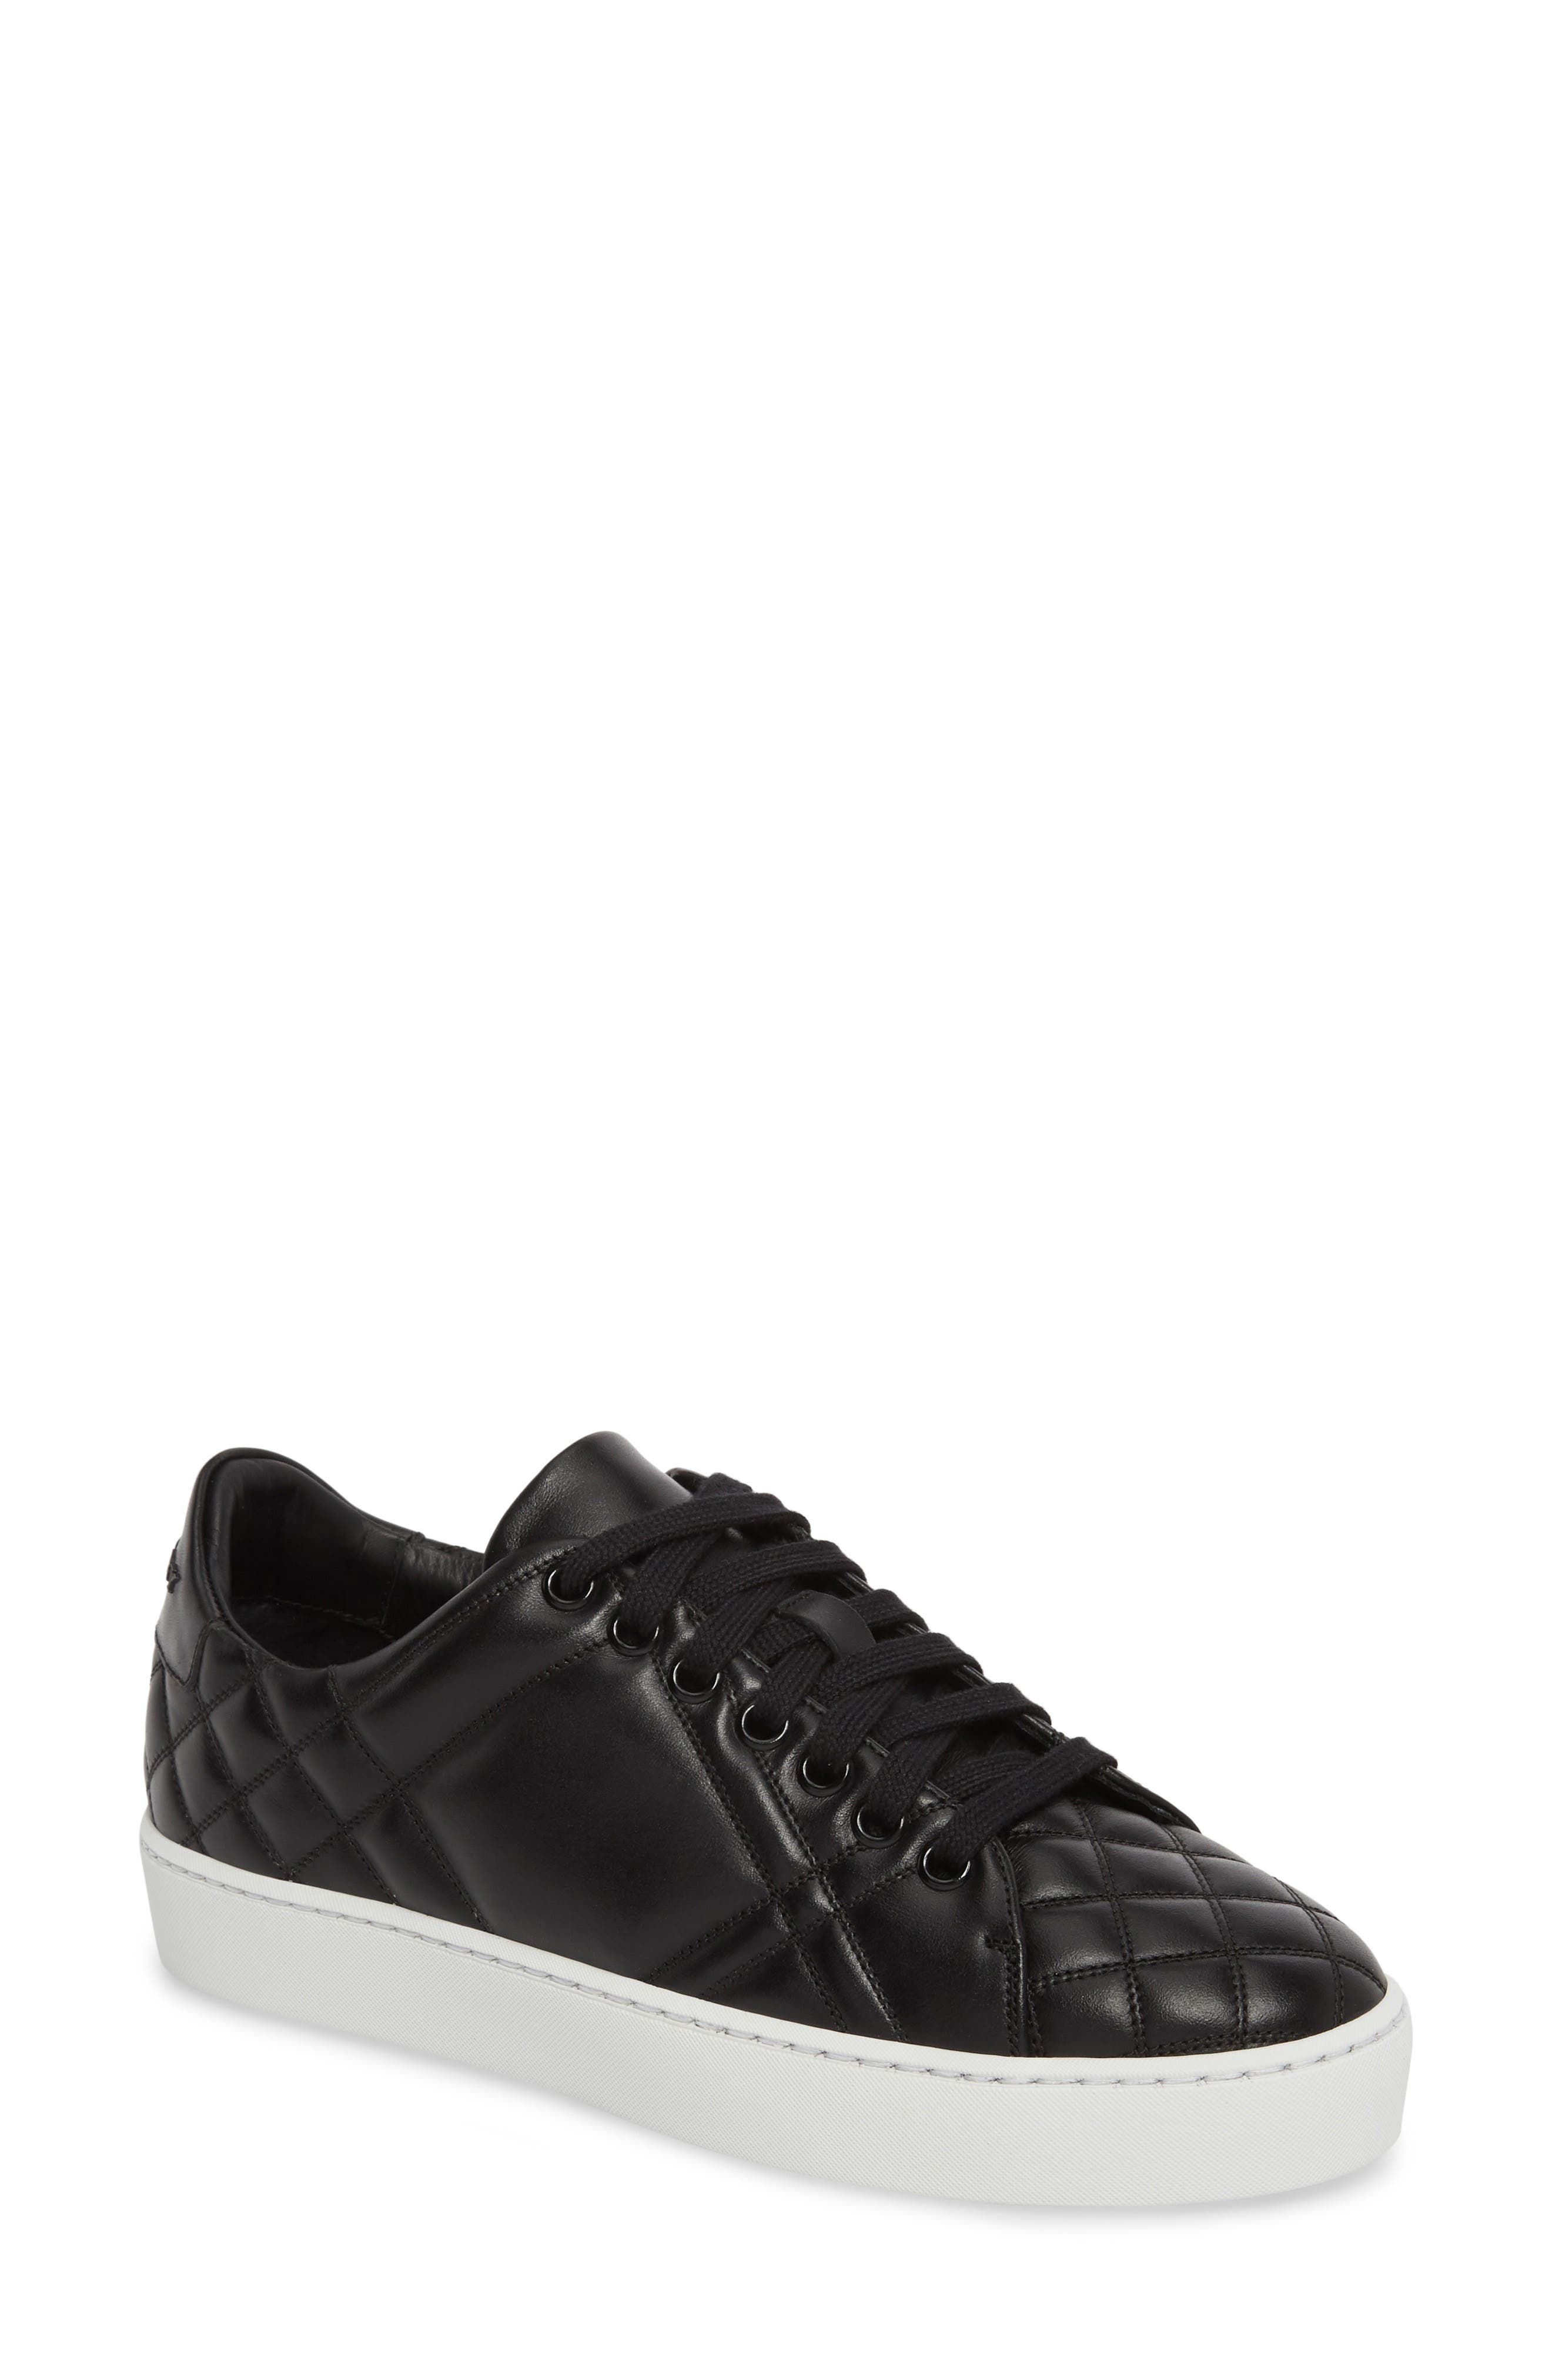 black leather quilted shoes